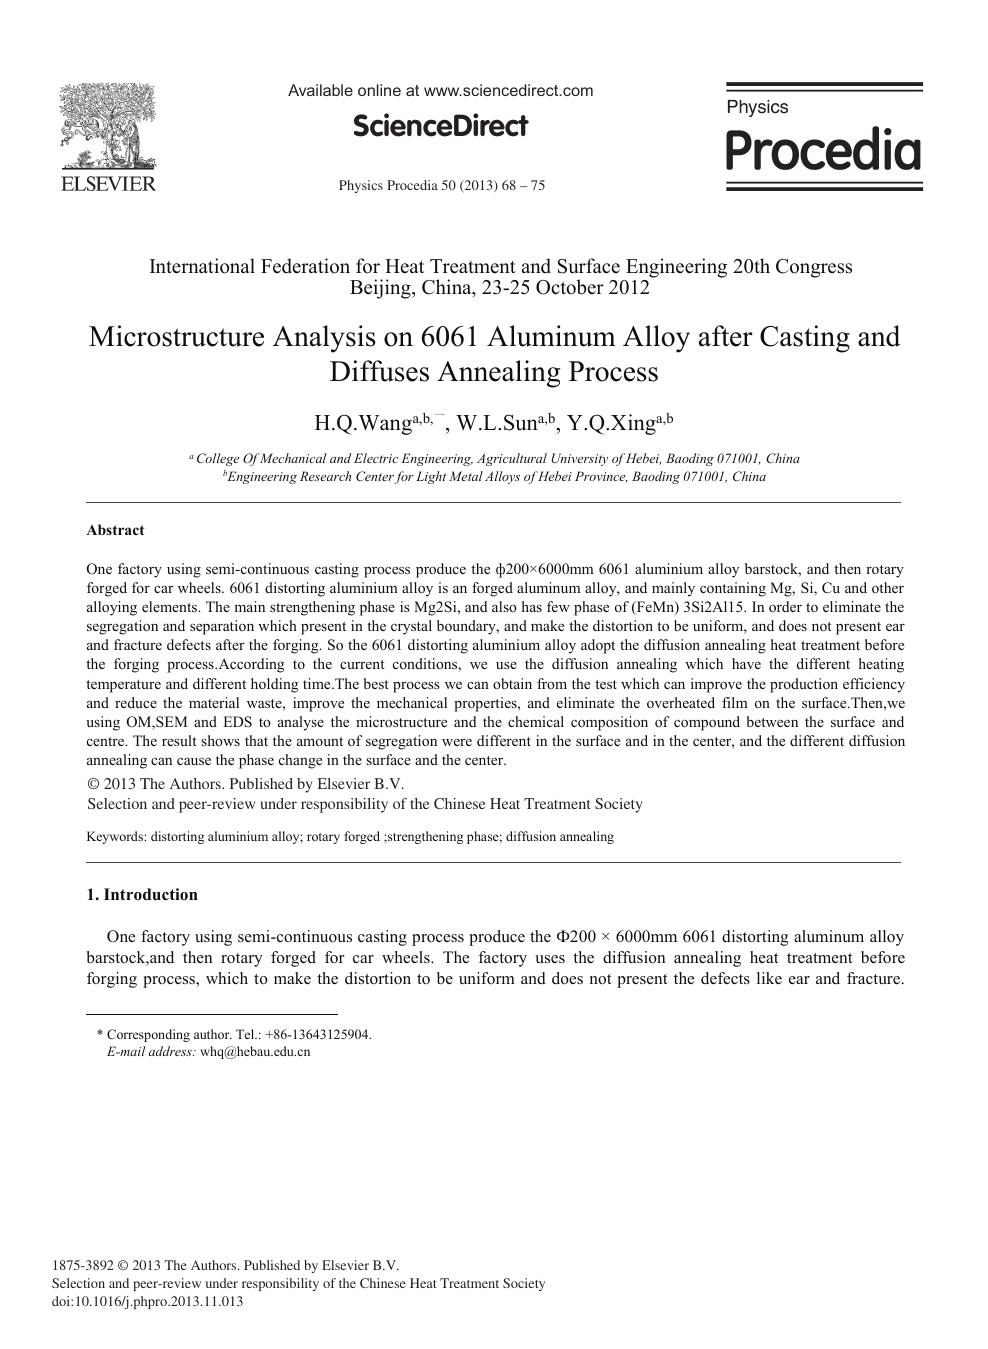 Microstructure Analysis On 6061 Aluminum Alloy After Casting And Diffuses Annealing Process Topic Of Research Paper In Materials Engineering Download Scholarly Article Pdf And Read For Free On Cyberleninka Open Science Hub